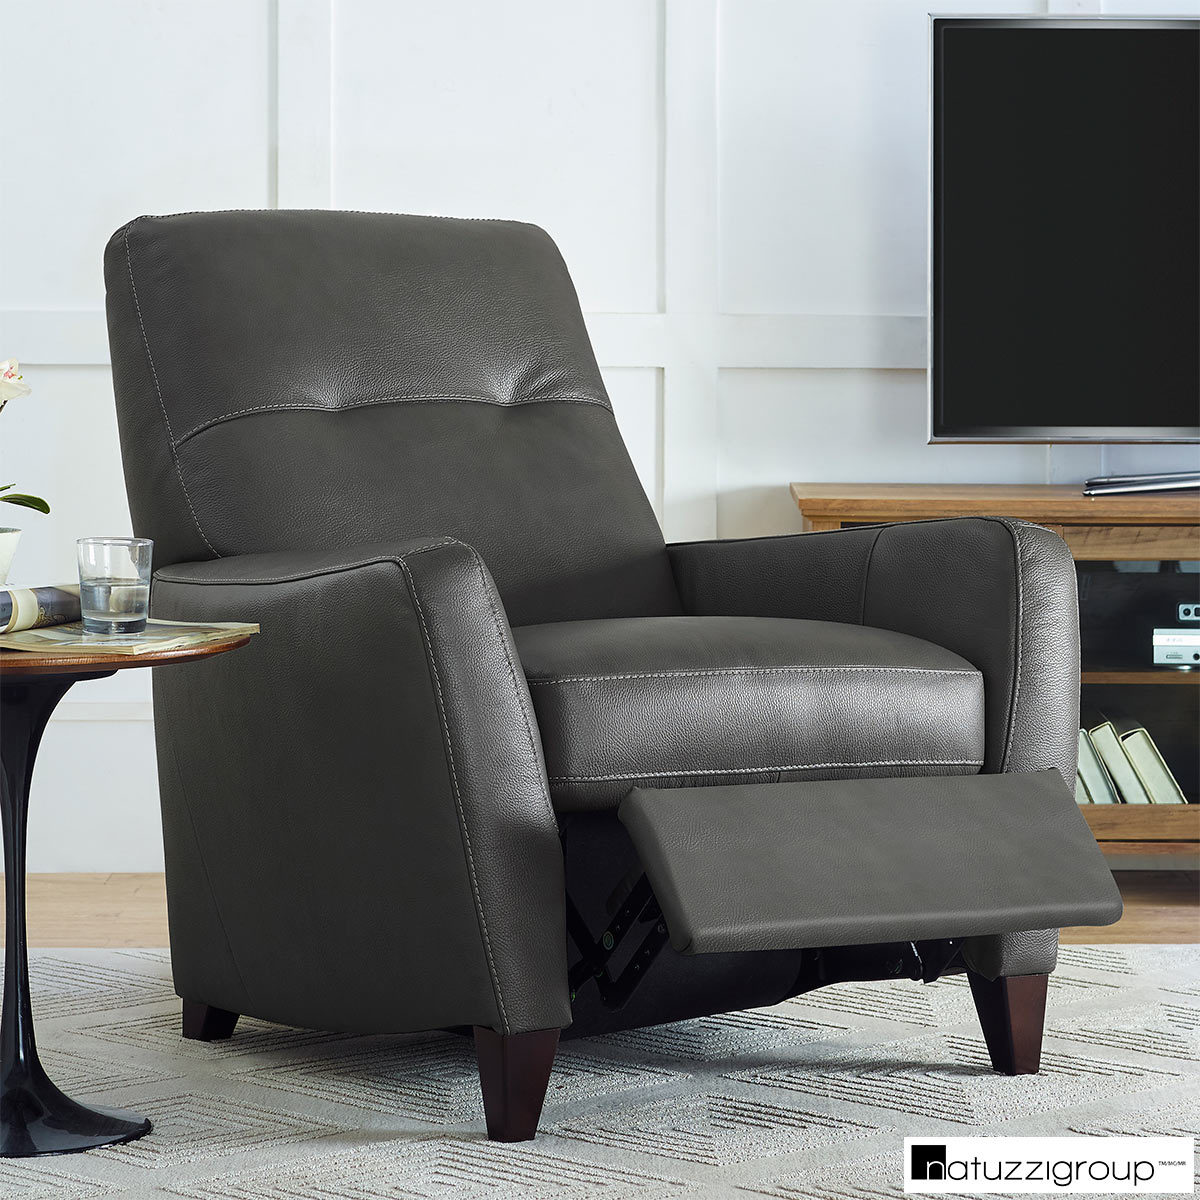 Grey Leather Pushback Recliner Armchair, Leather Chairs Costco